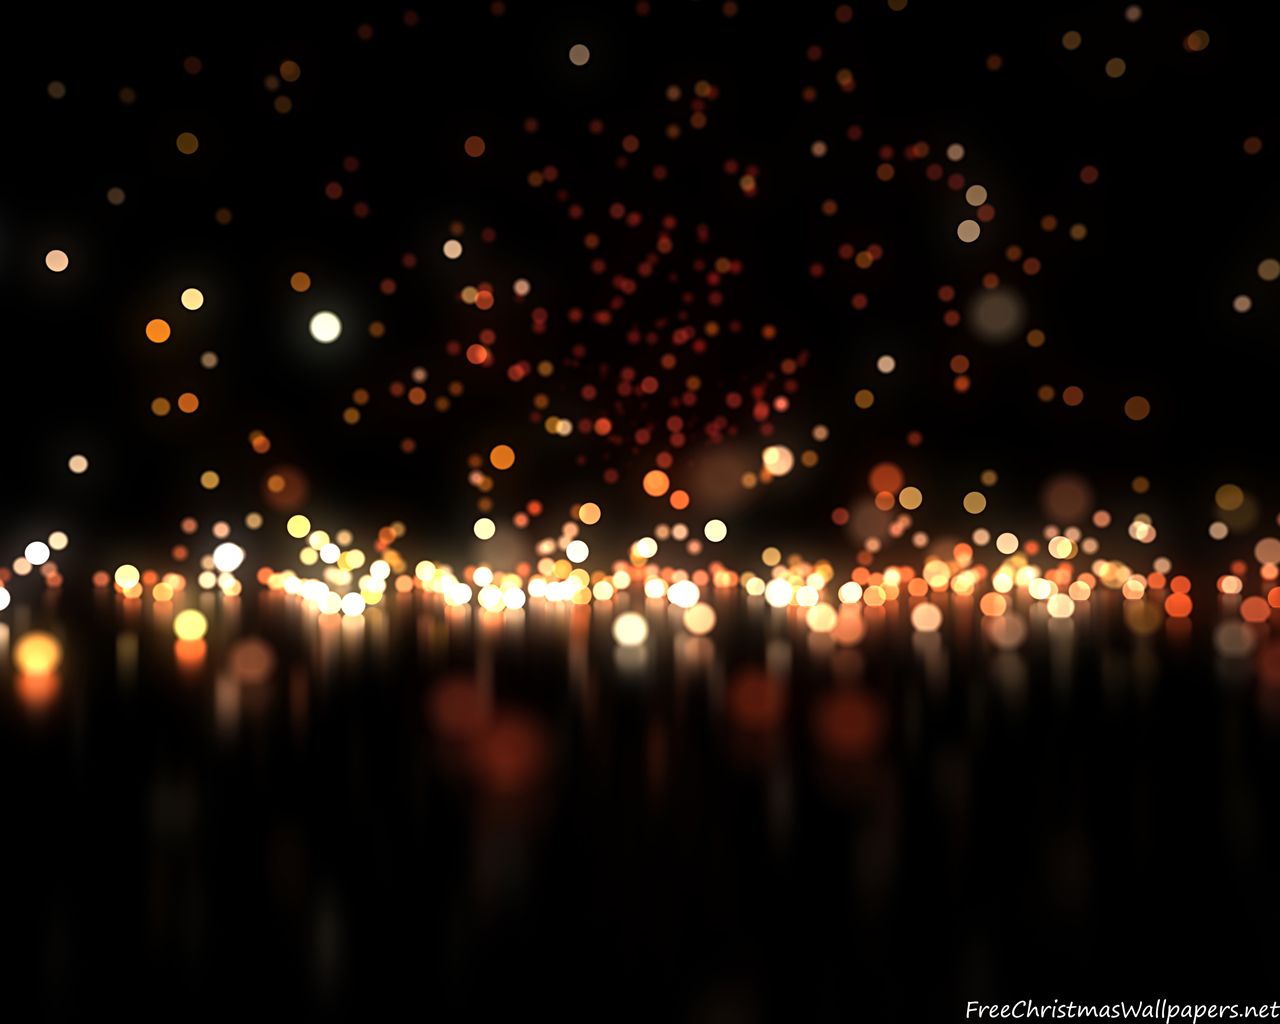 Christmas Glow Particles. Christmas lights wallpaper, Computer wallpaper desktop wallpaper, Light wave